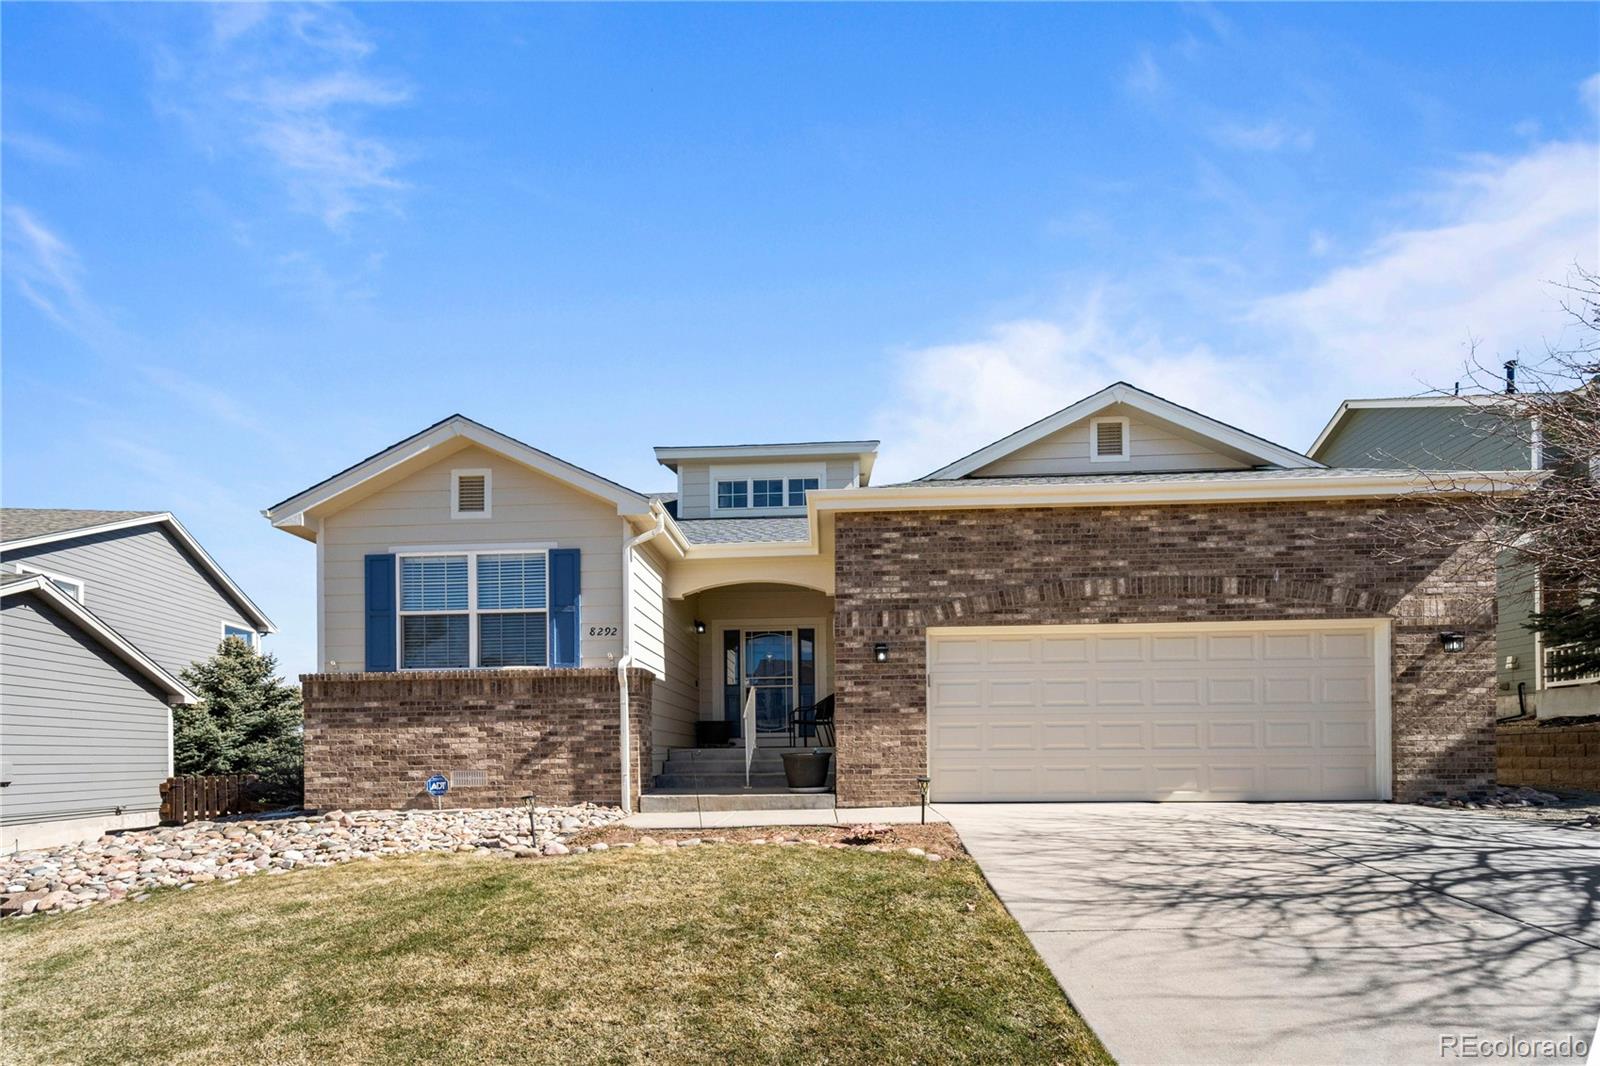 8292  briar ridge drive, Castle Pines sold home. Closed on 2024-04-30 for $750,000.